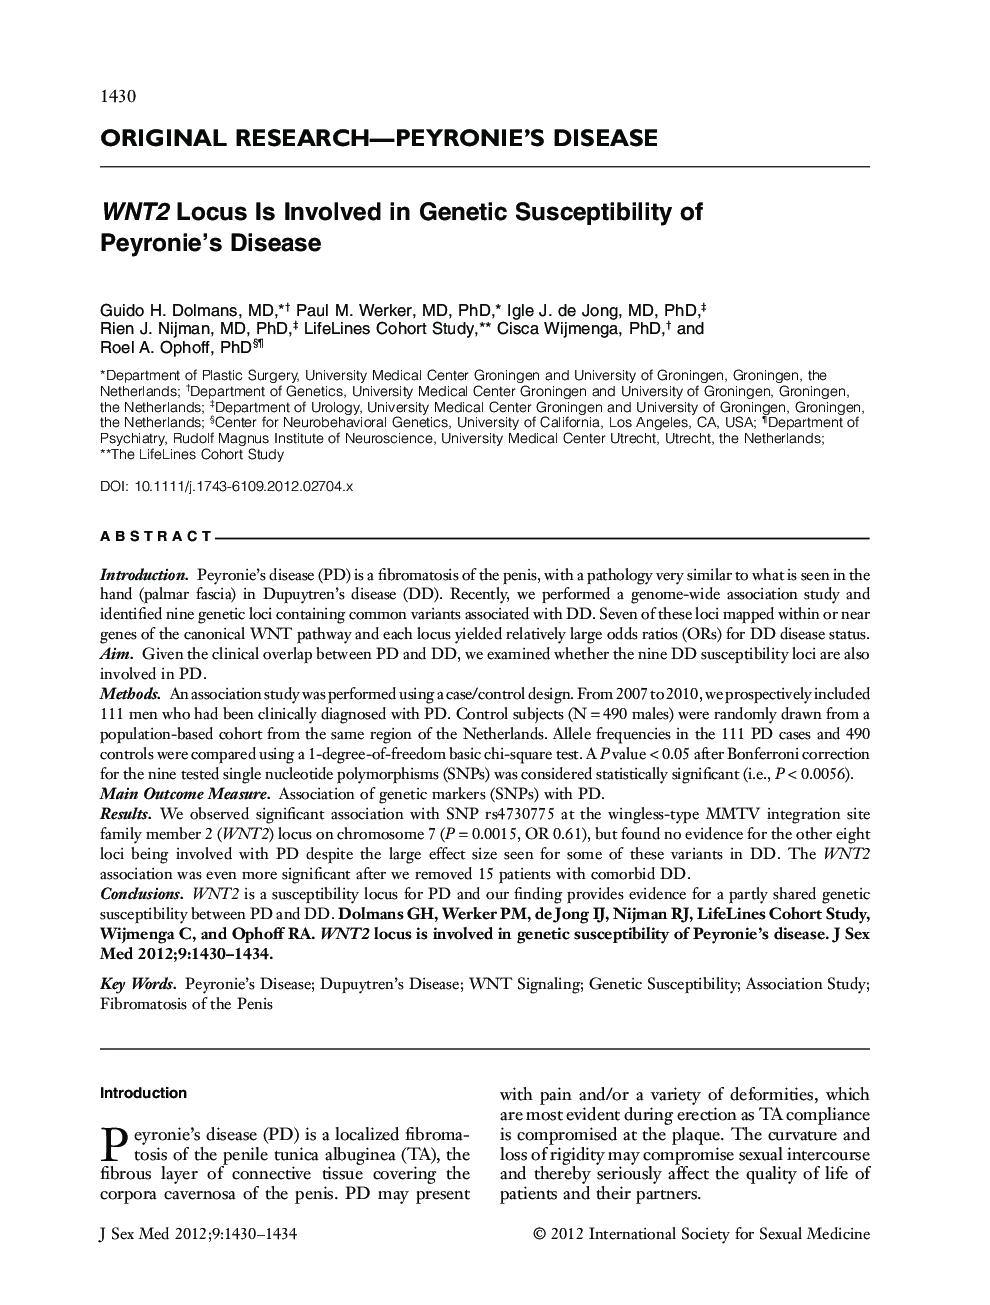 WNT2 Locus Is Involved in Genetic Susceptibility of Peyronie's Disease